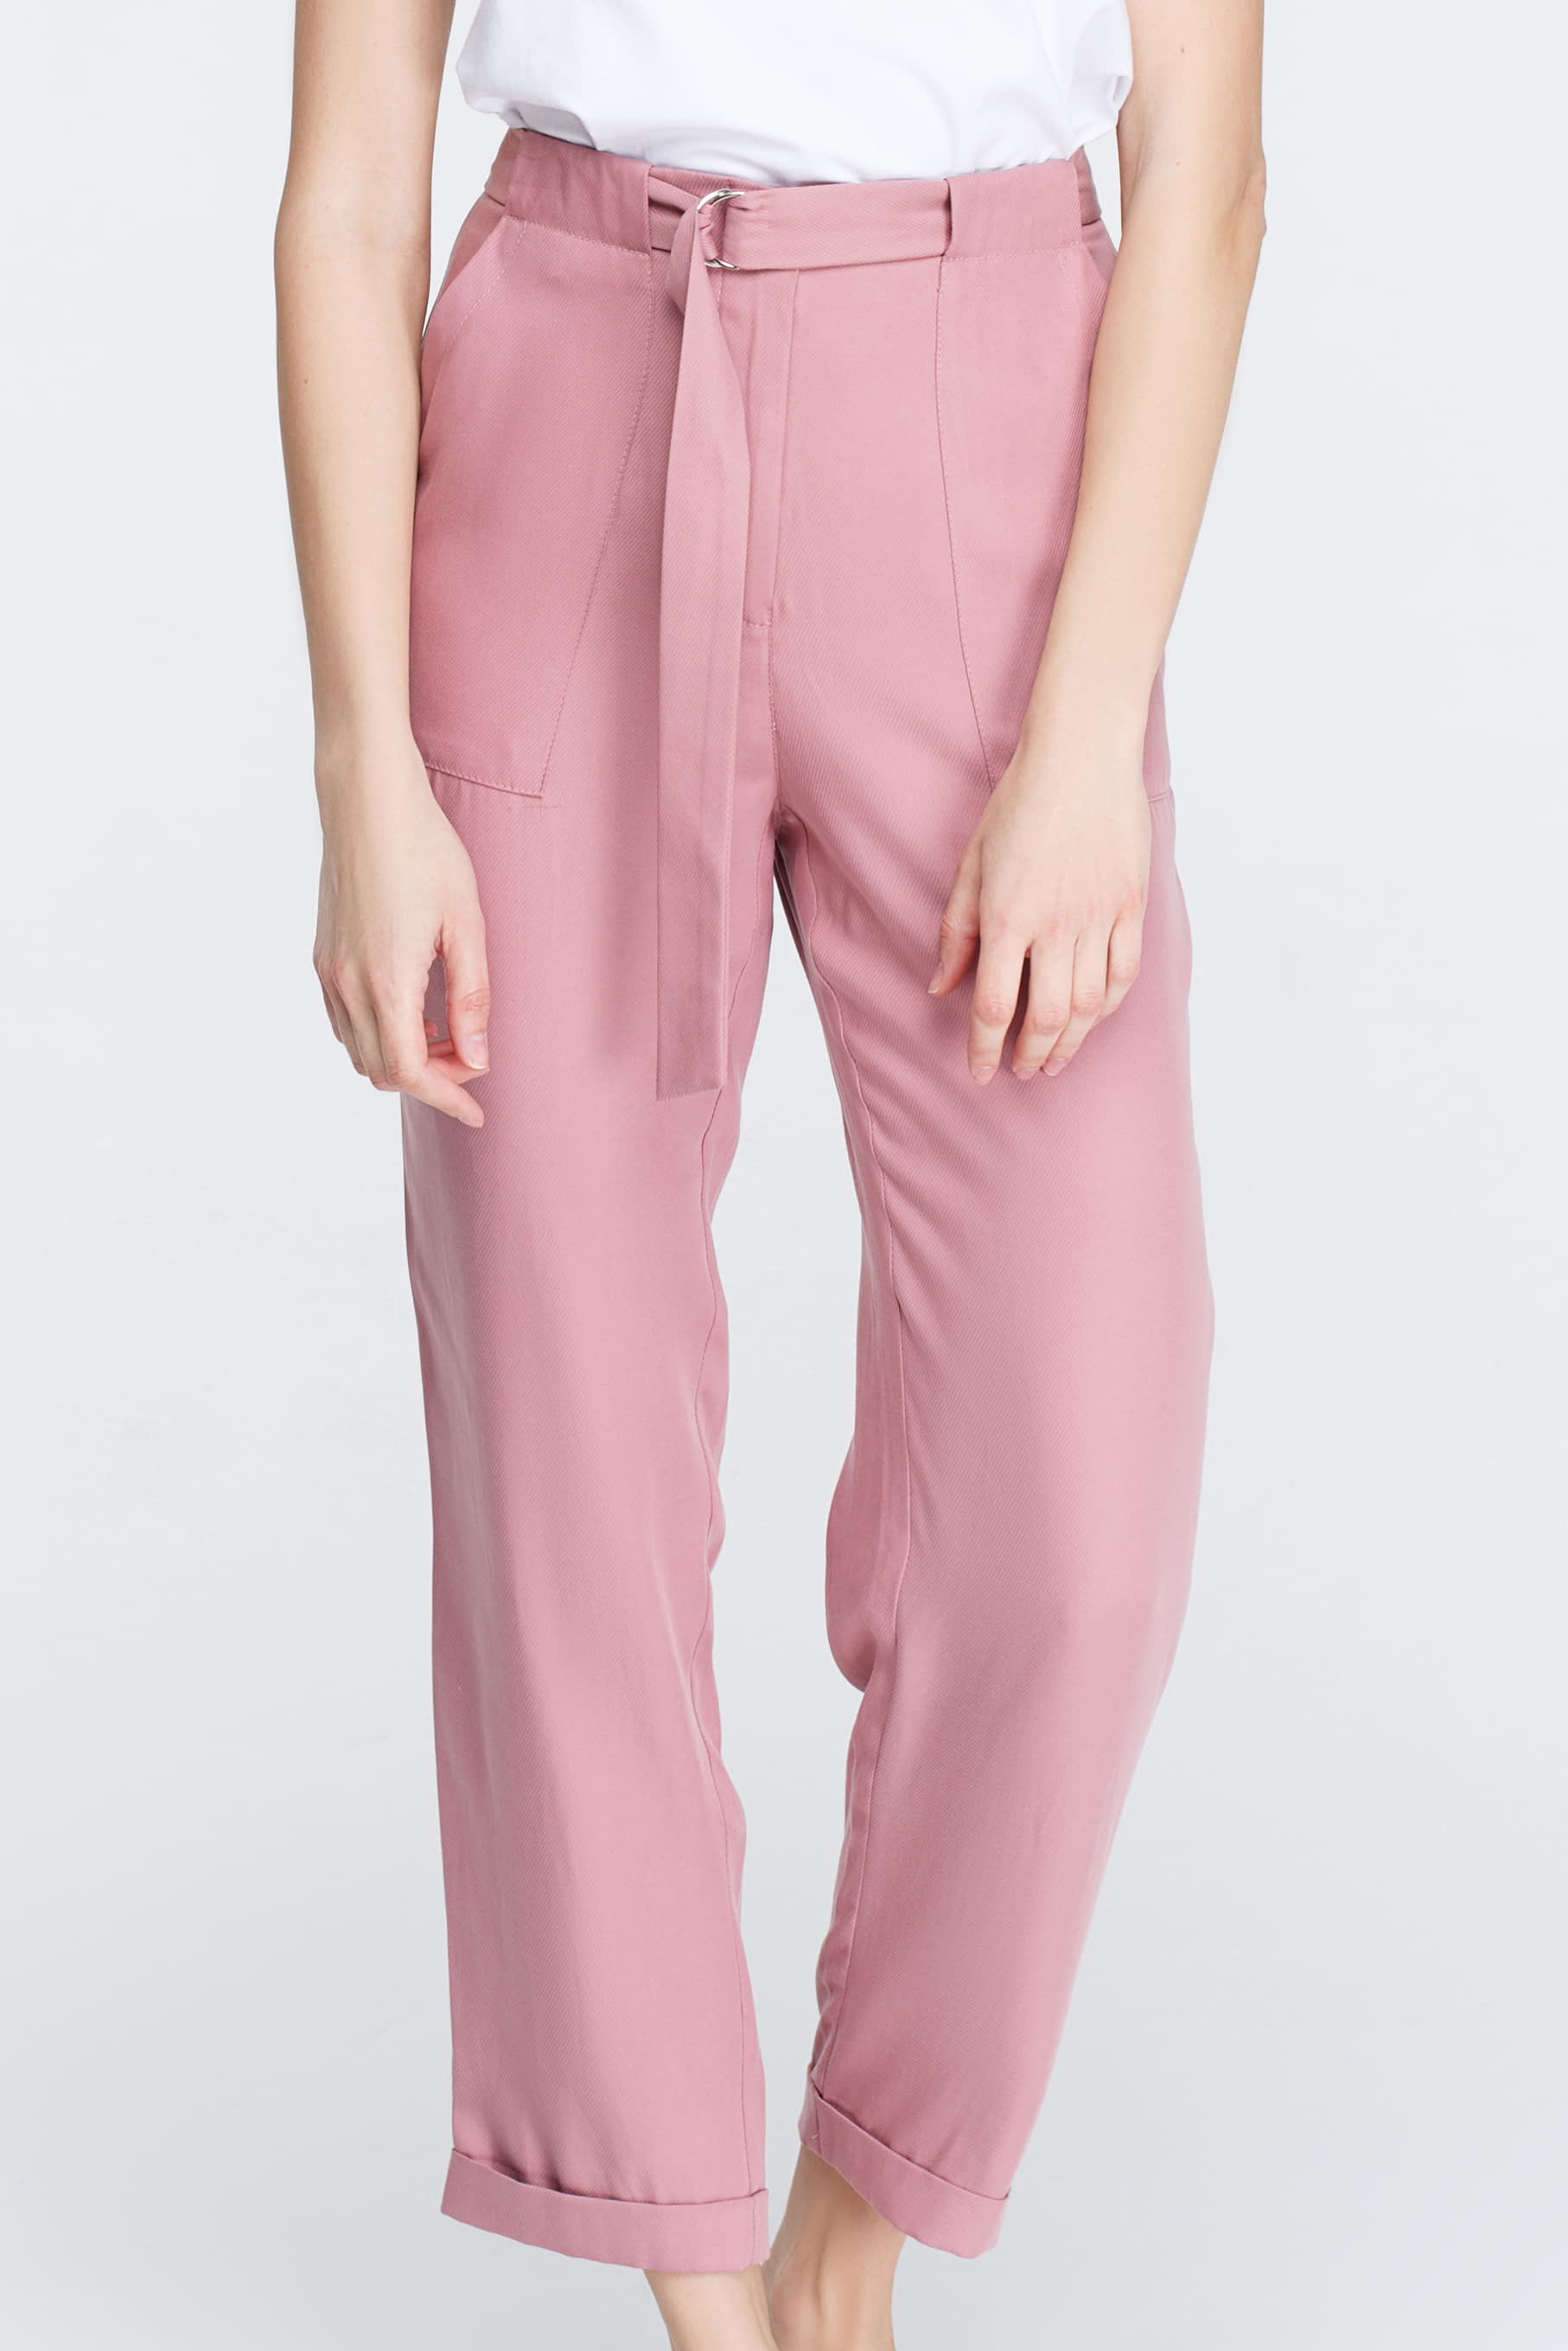 Pink pants with belt, photo 3